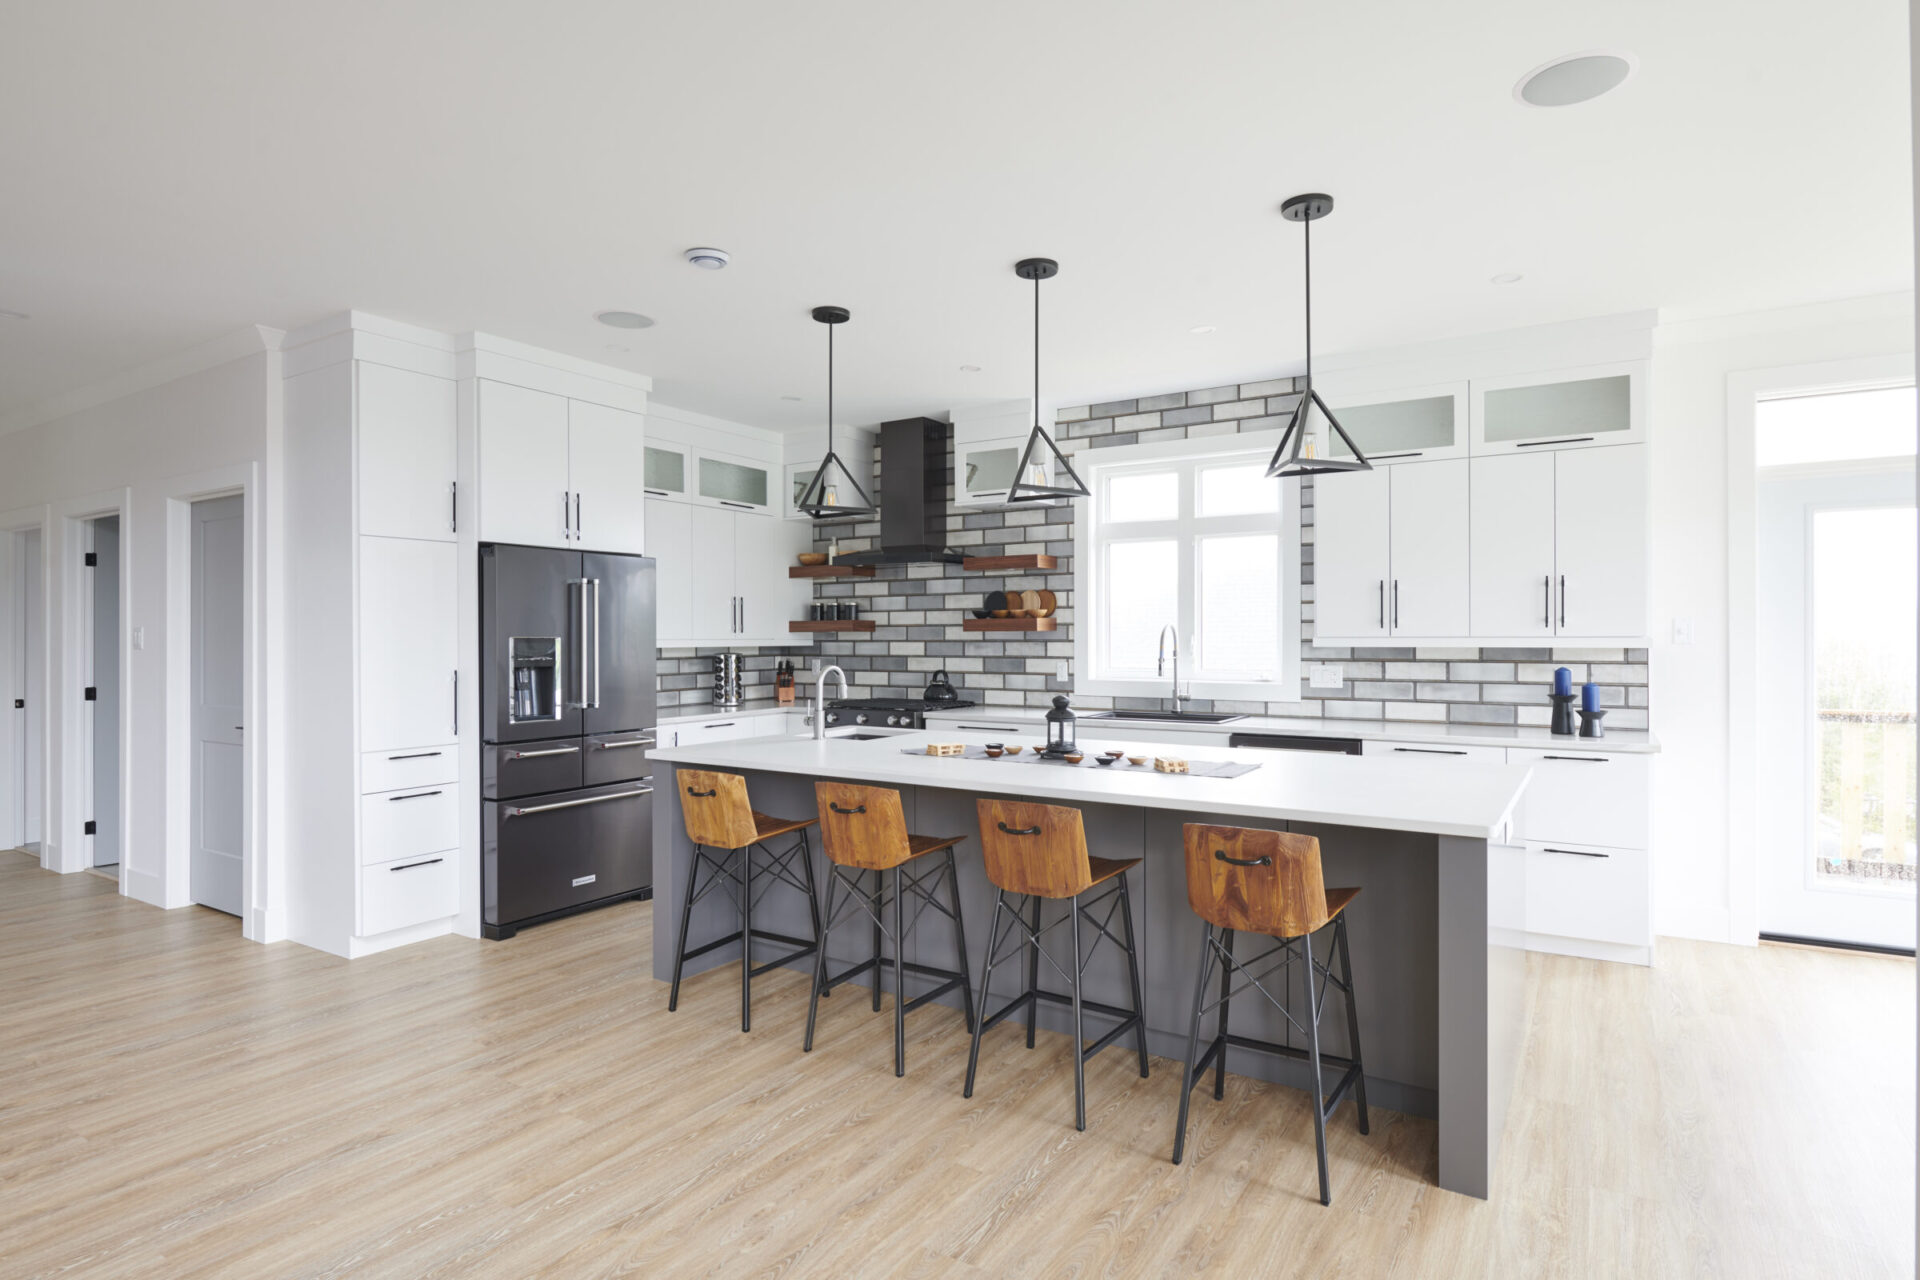 Modern kitchen with white cabinetry, gray backsplash, black appliances, a central island with bar stools, pendant lights, and light wood flooring.